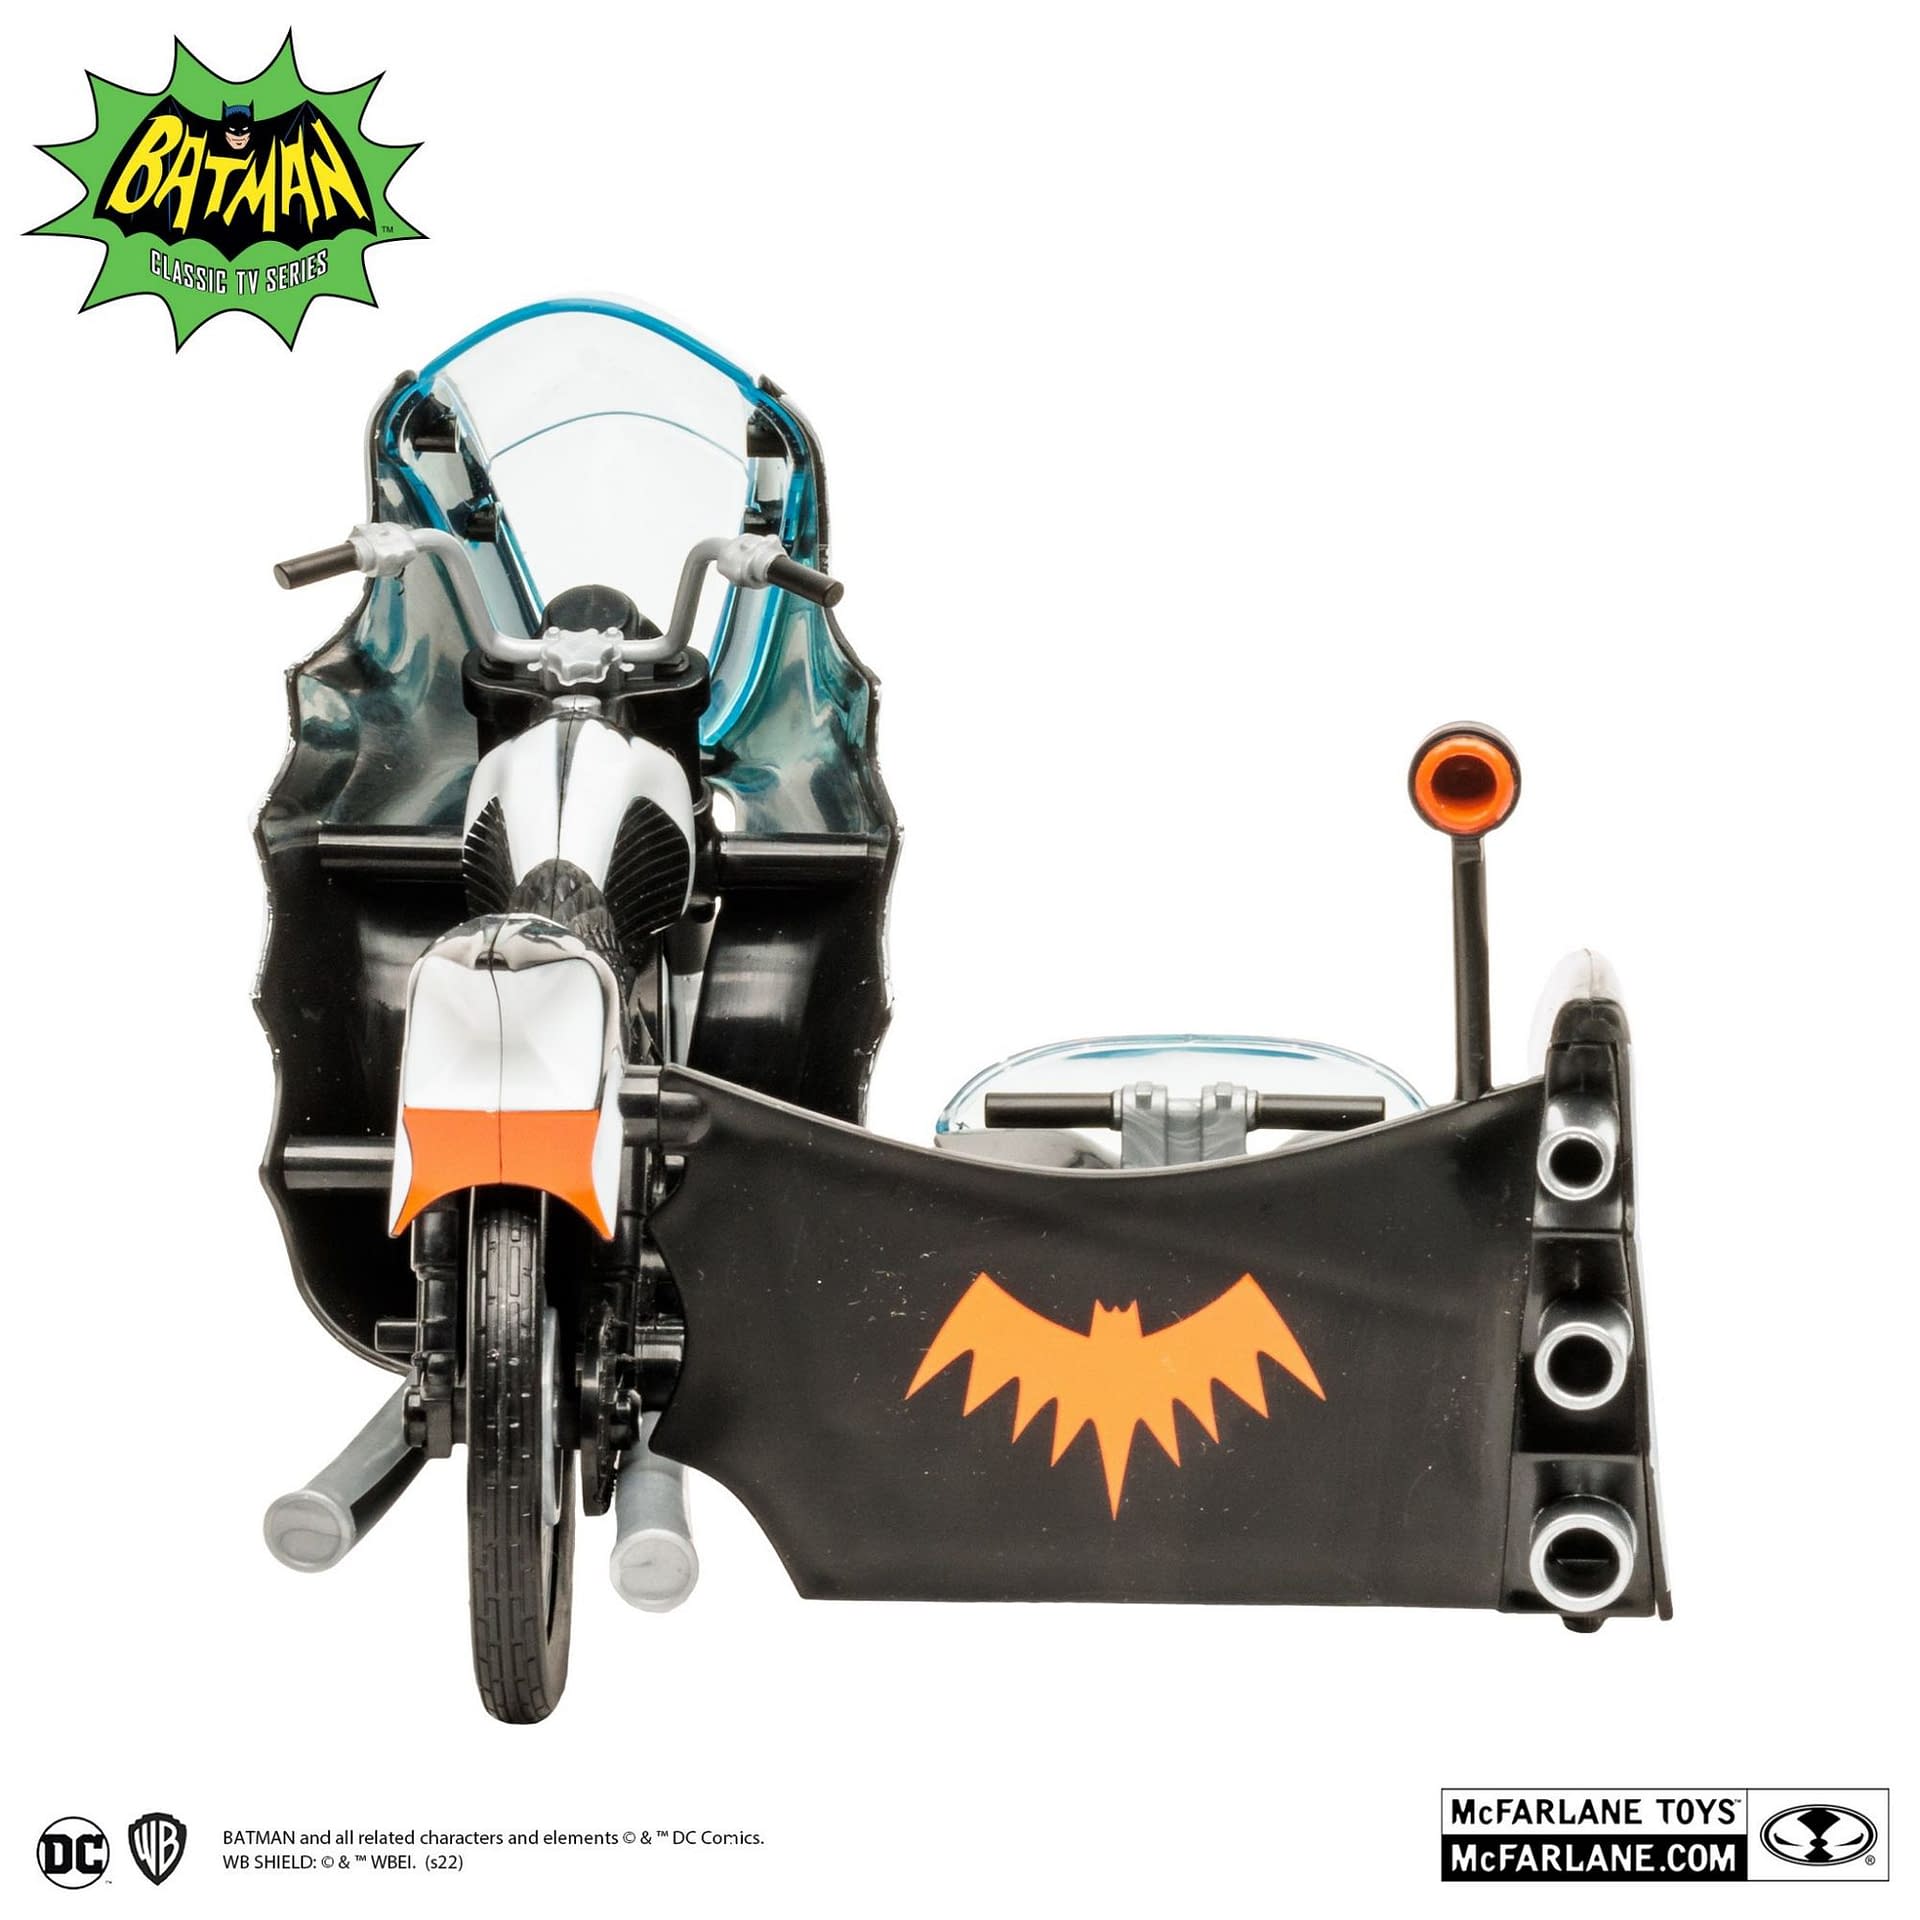 Rev Your Engines with McFarlane's New Batman 66' Batcycle